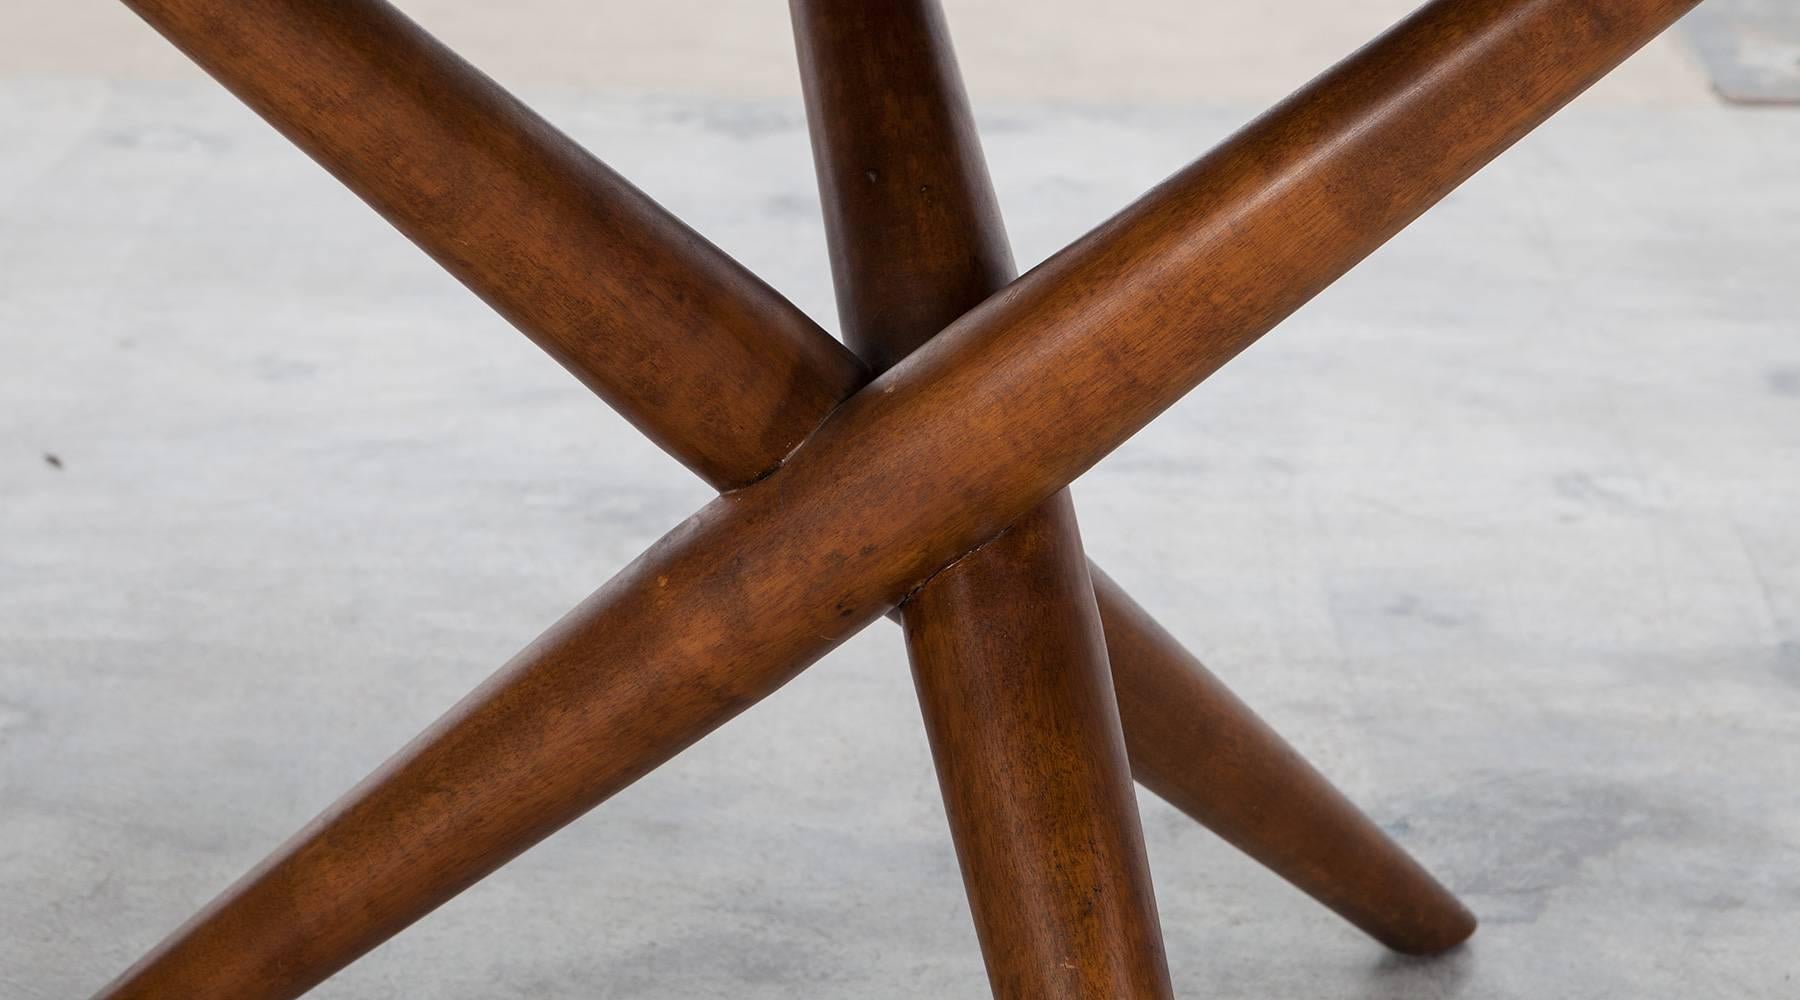 Sculptural Side Table in walnut designed by T.H. Robsjohn Gibbings. Very sculptural splayed tripod form, yet strong and sturdy. It is a versatile size and could be used as a side or night stand or coffee table. These are one of Robsjohn's signature